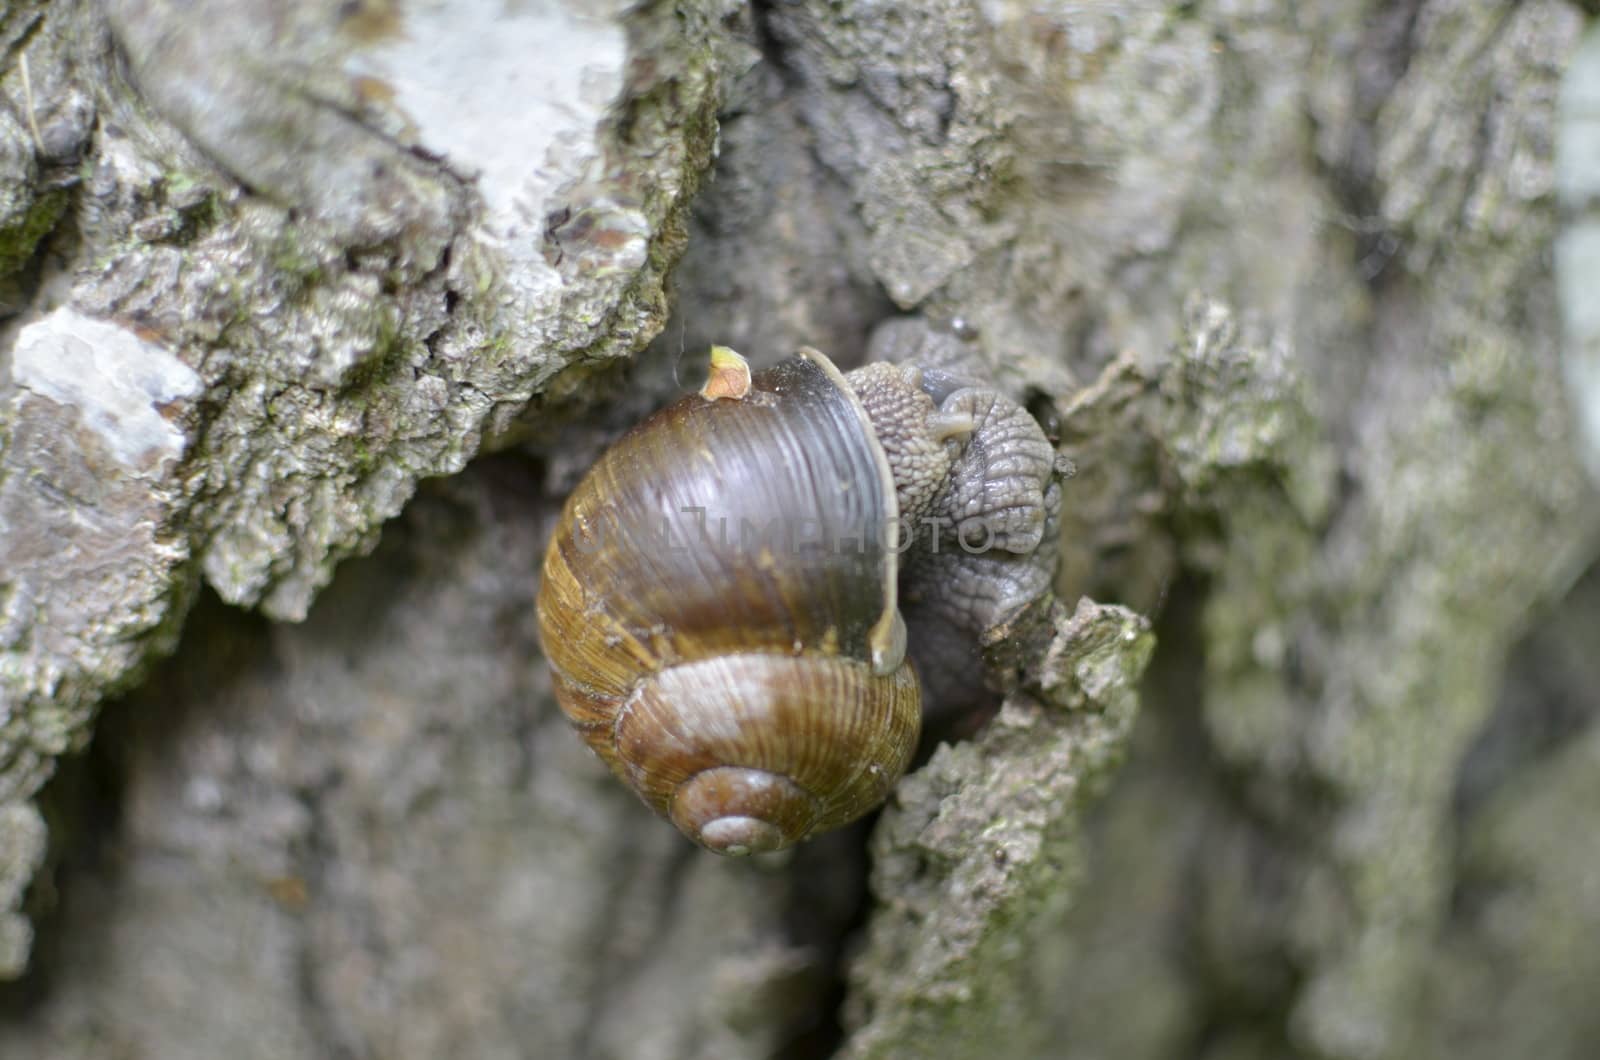 Brown Snail in Shell on Tree Bark.